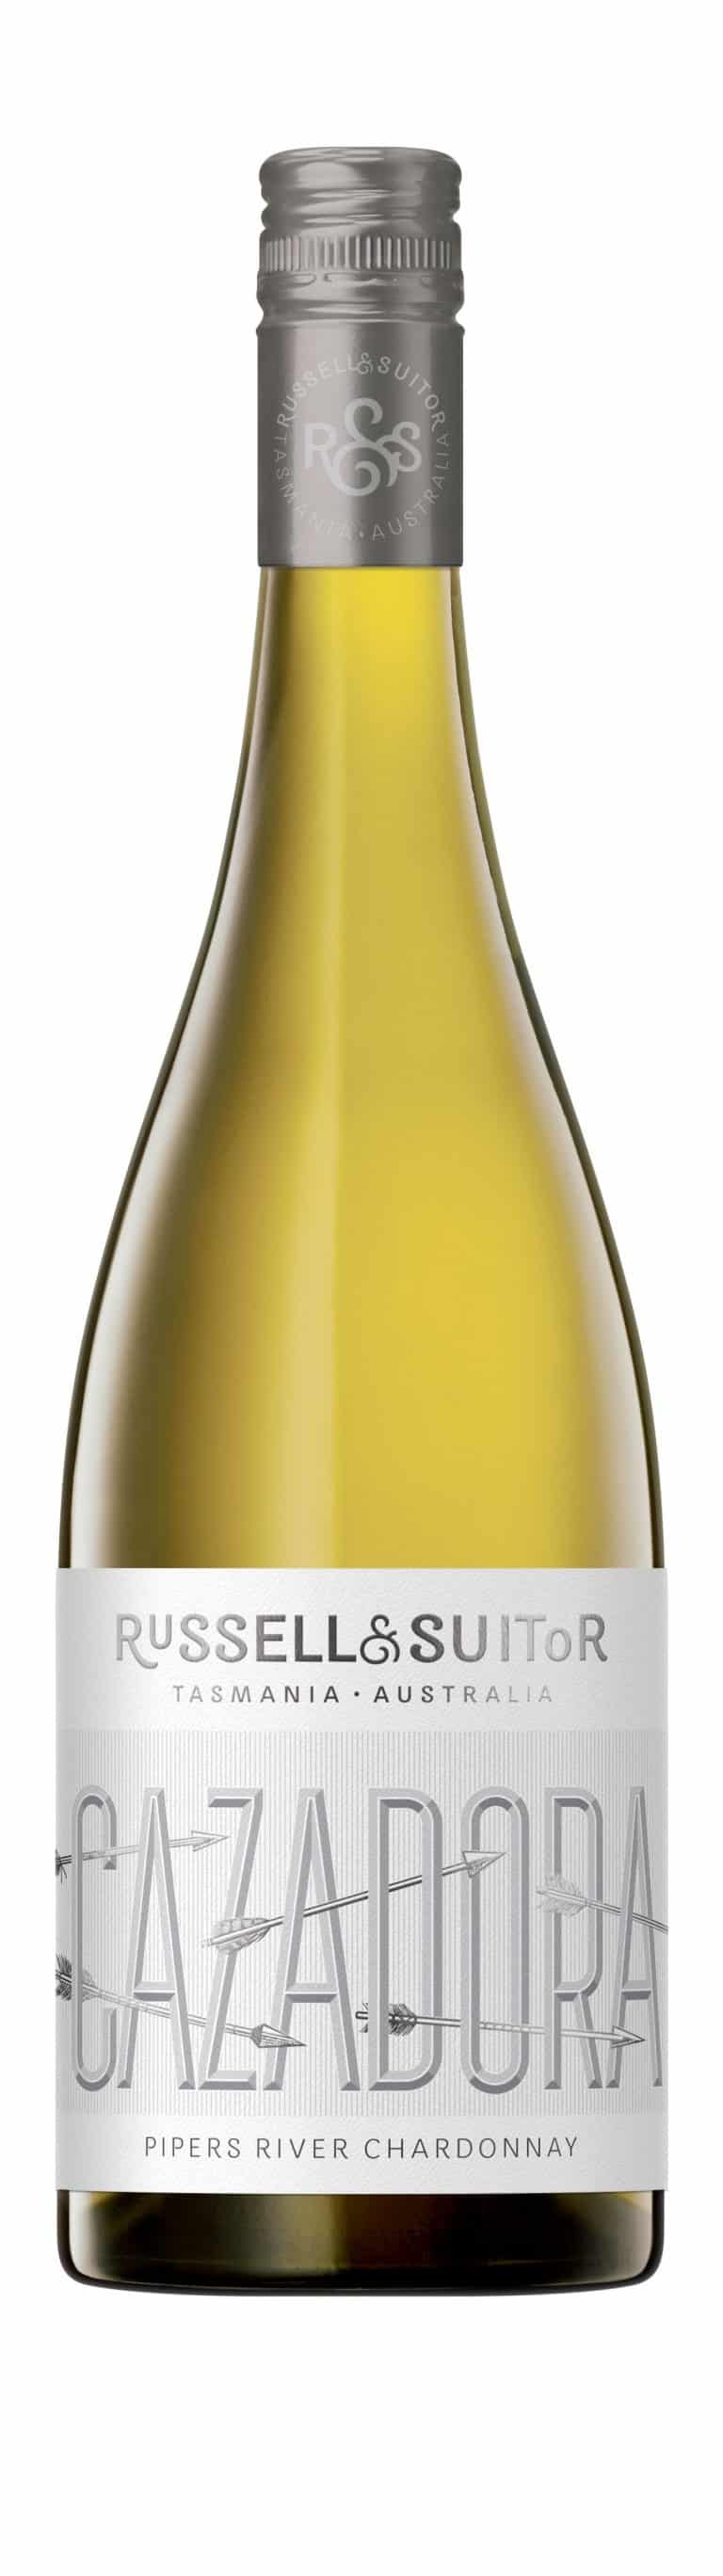 Russell & Suitor Cazadora Chardonnay 2021